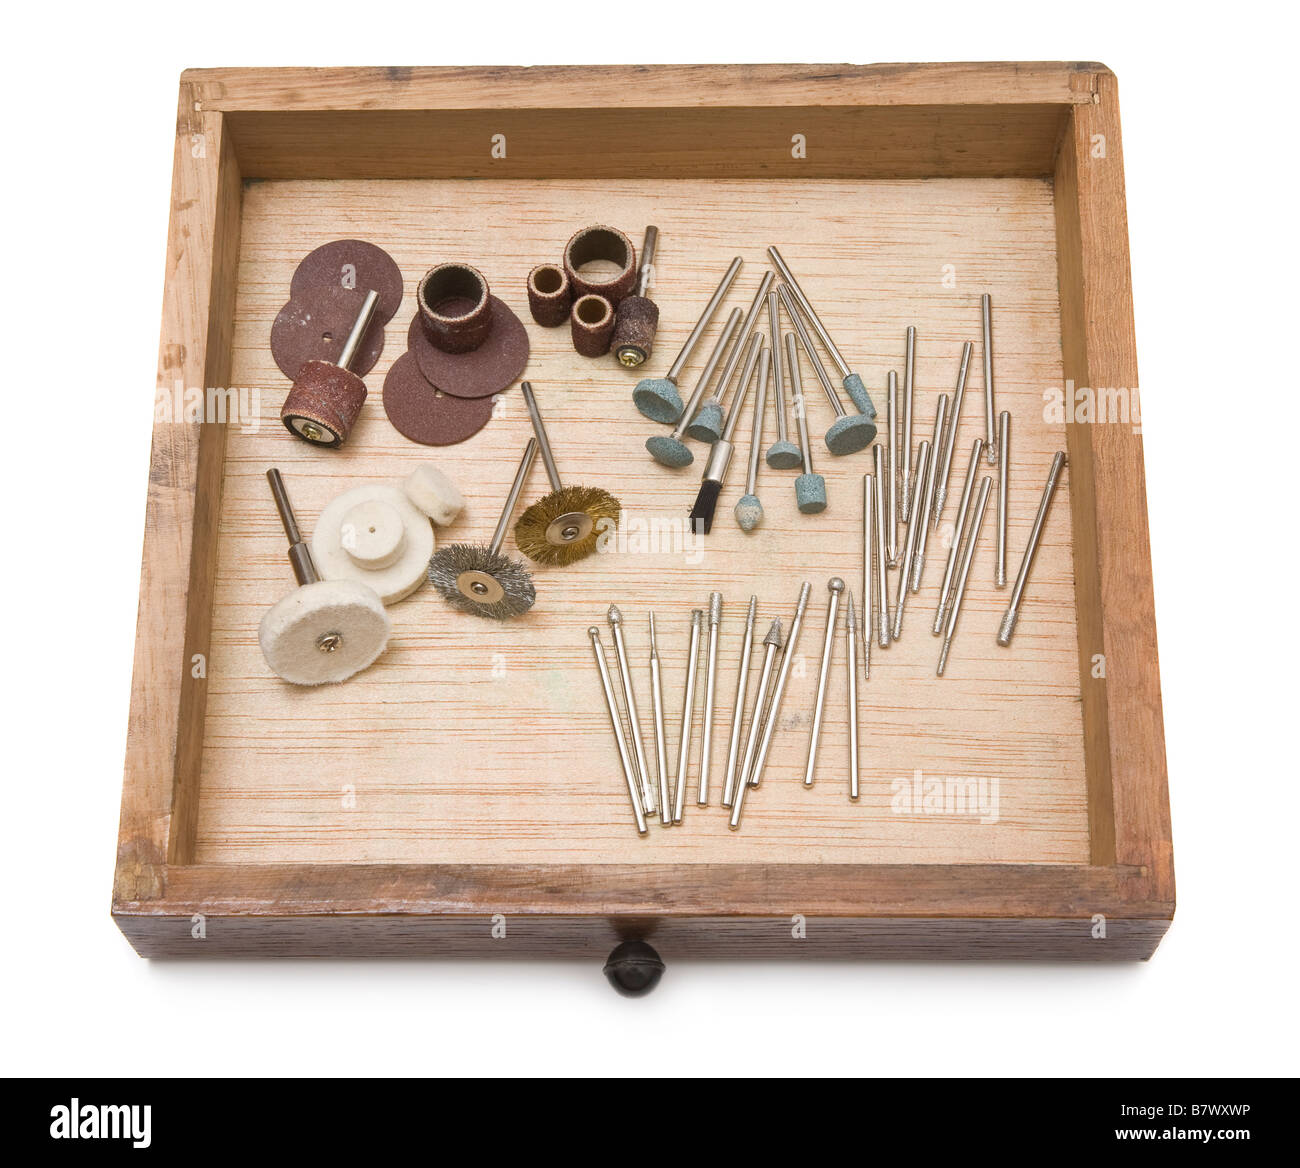 Small power tool tips in wooden drawer used for grinding and polishing shaping Stock Photo